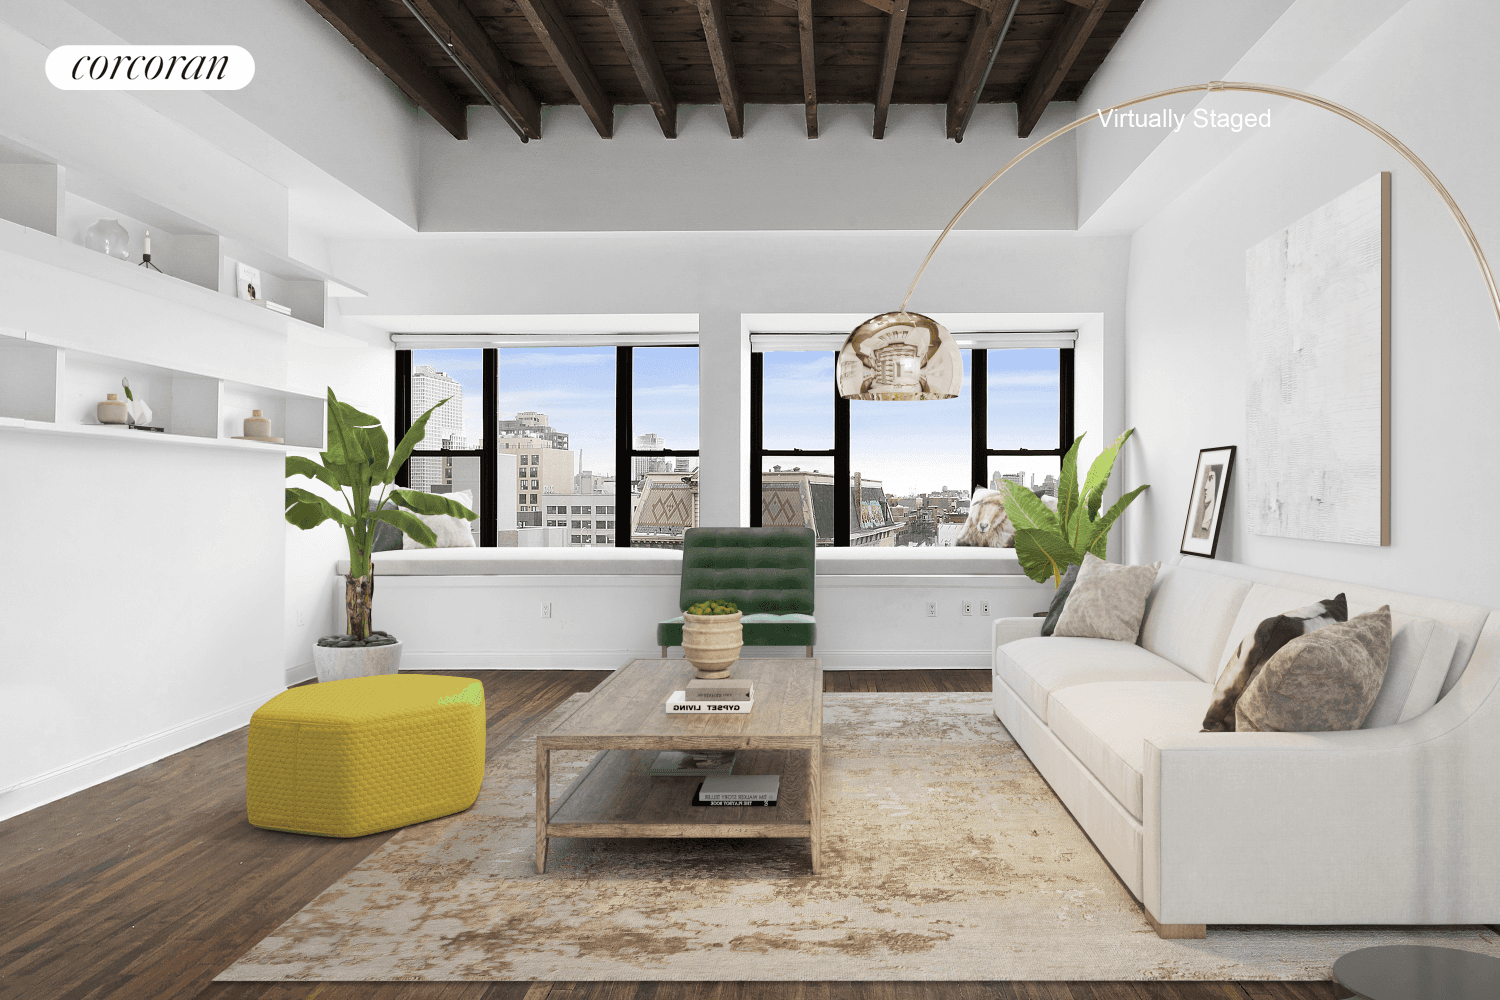 Lease start between August 15th and September 1st 860 SF this is a legal studio, used as a 1 bedroomWelcome to one of the original condo conversions in Williamsburg at ...